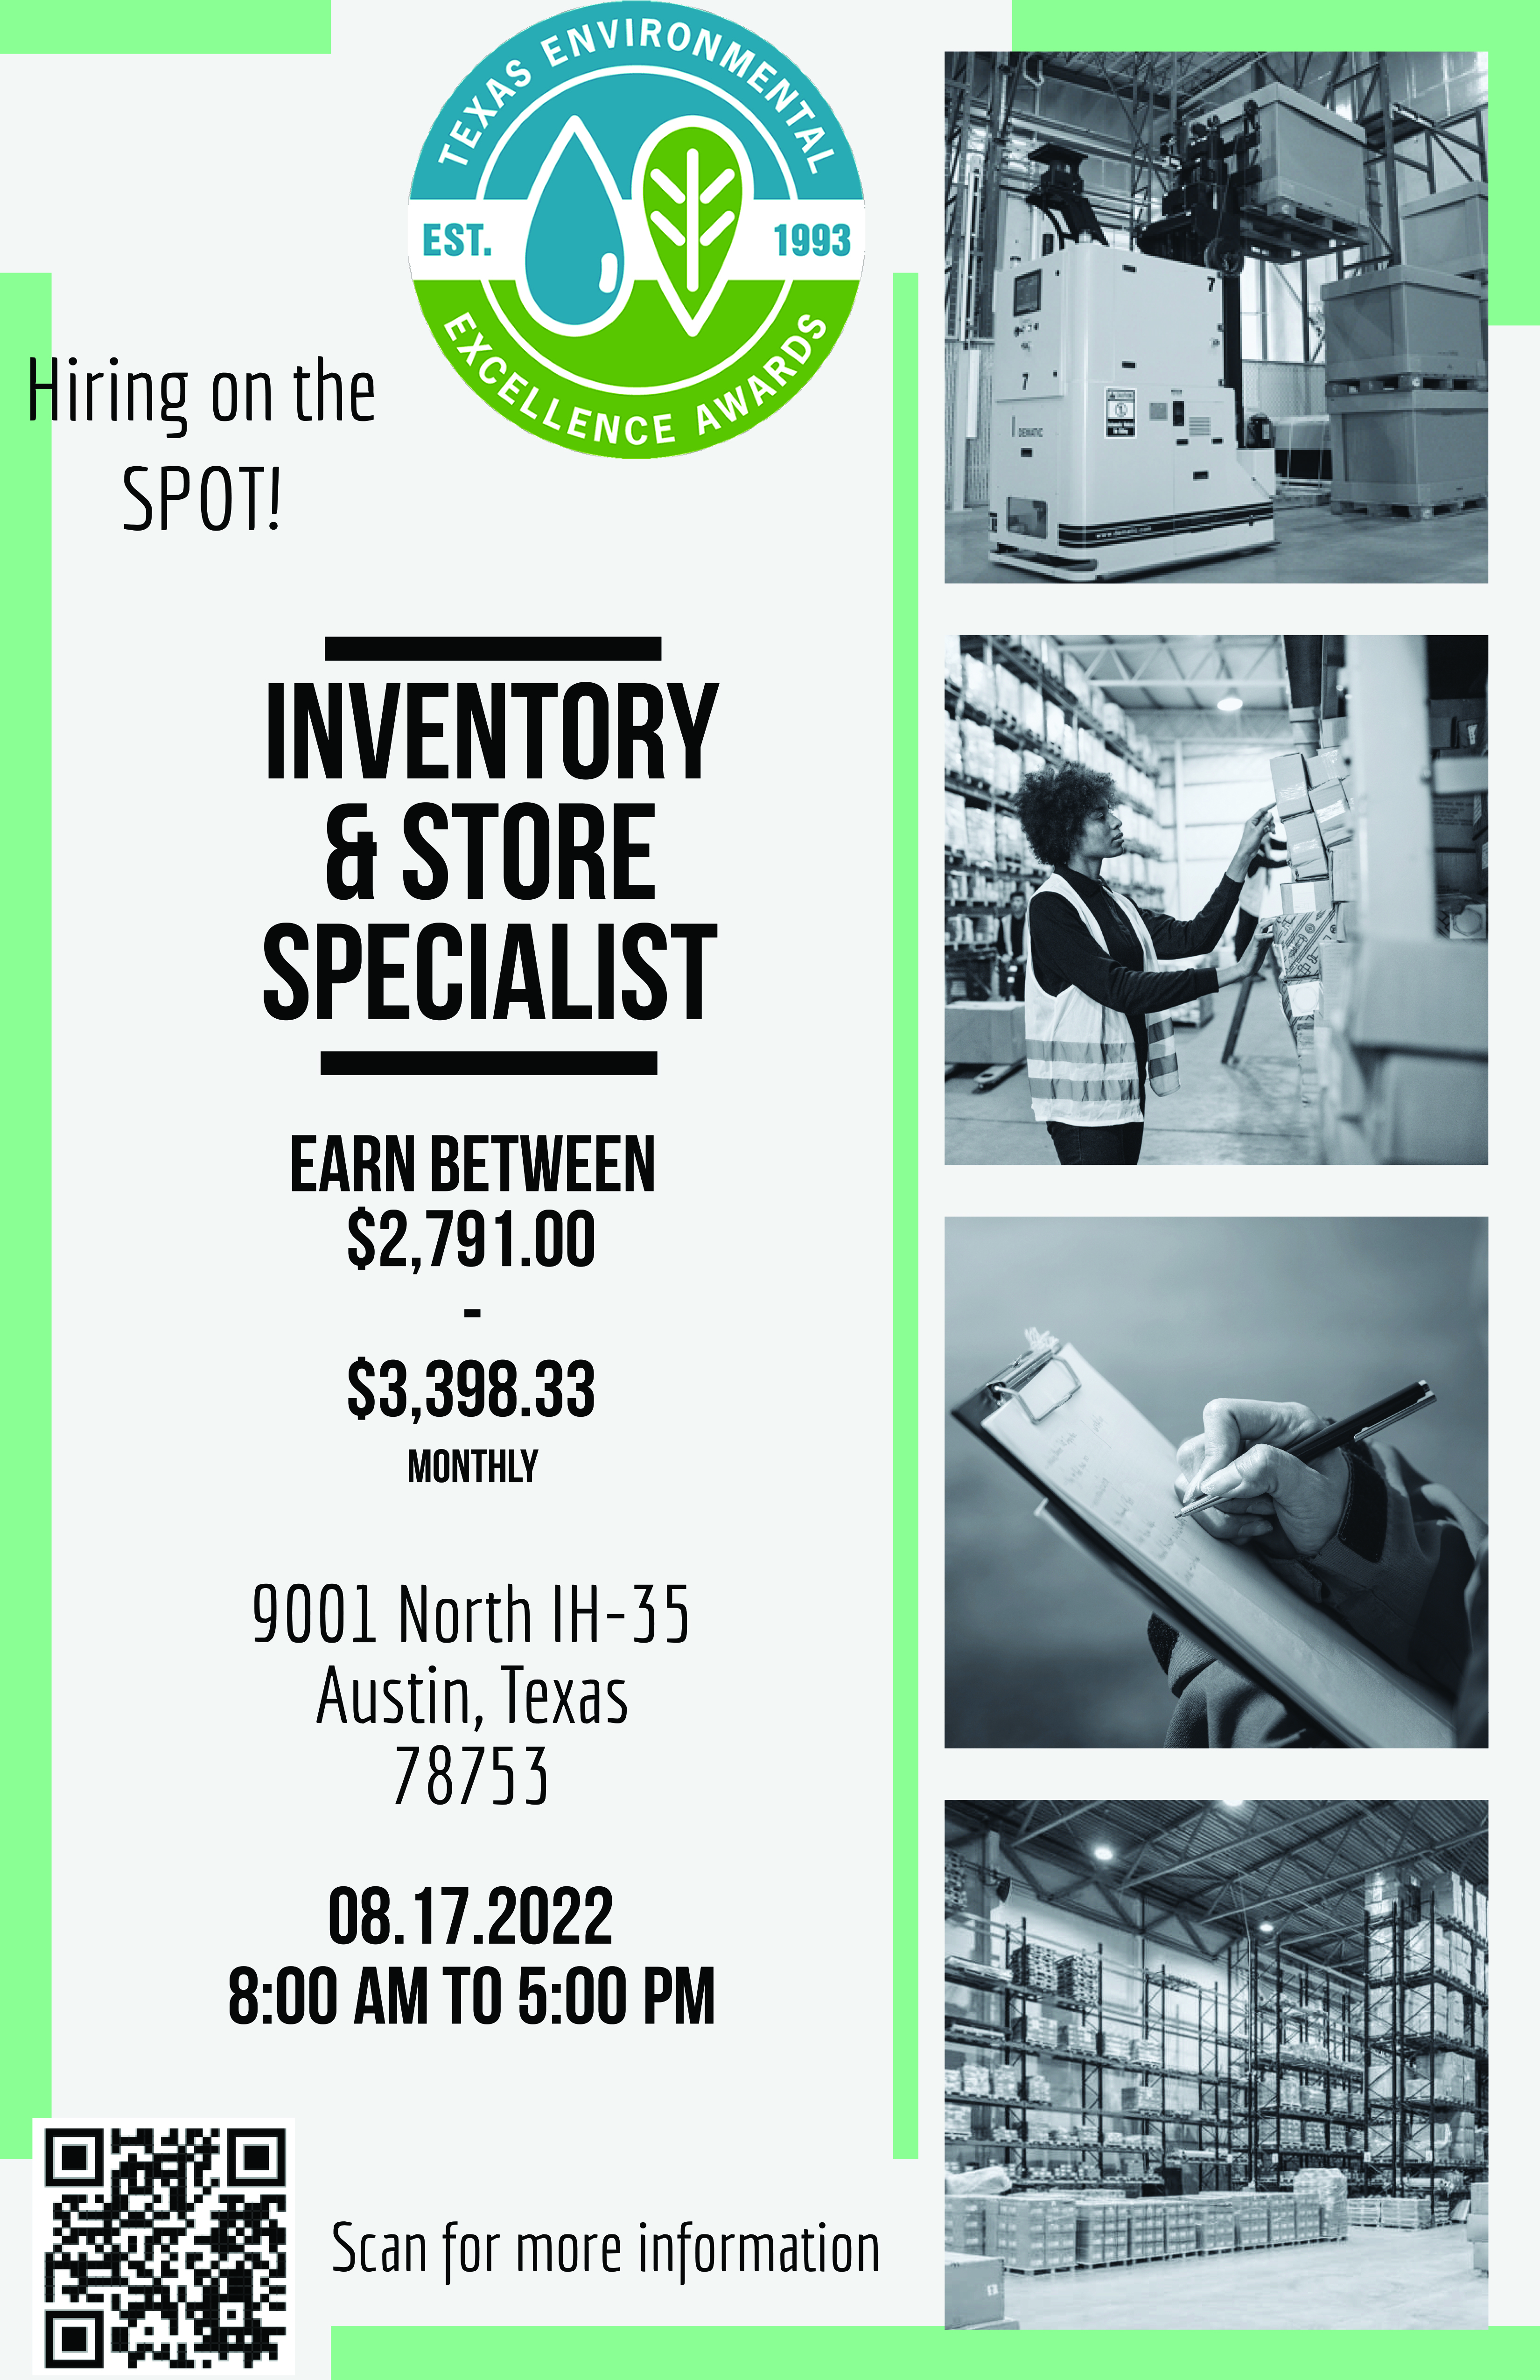 Inventory & Store Specialist Express Hiring